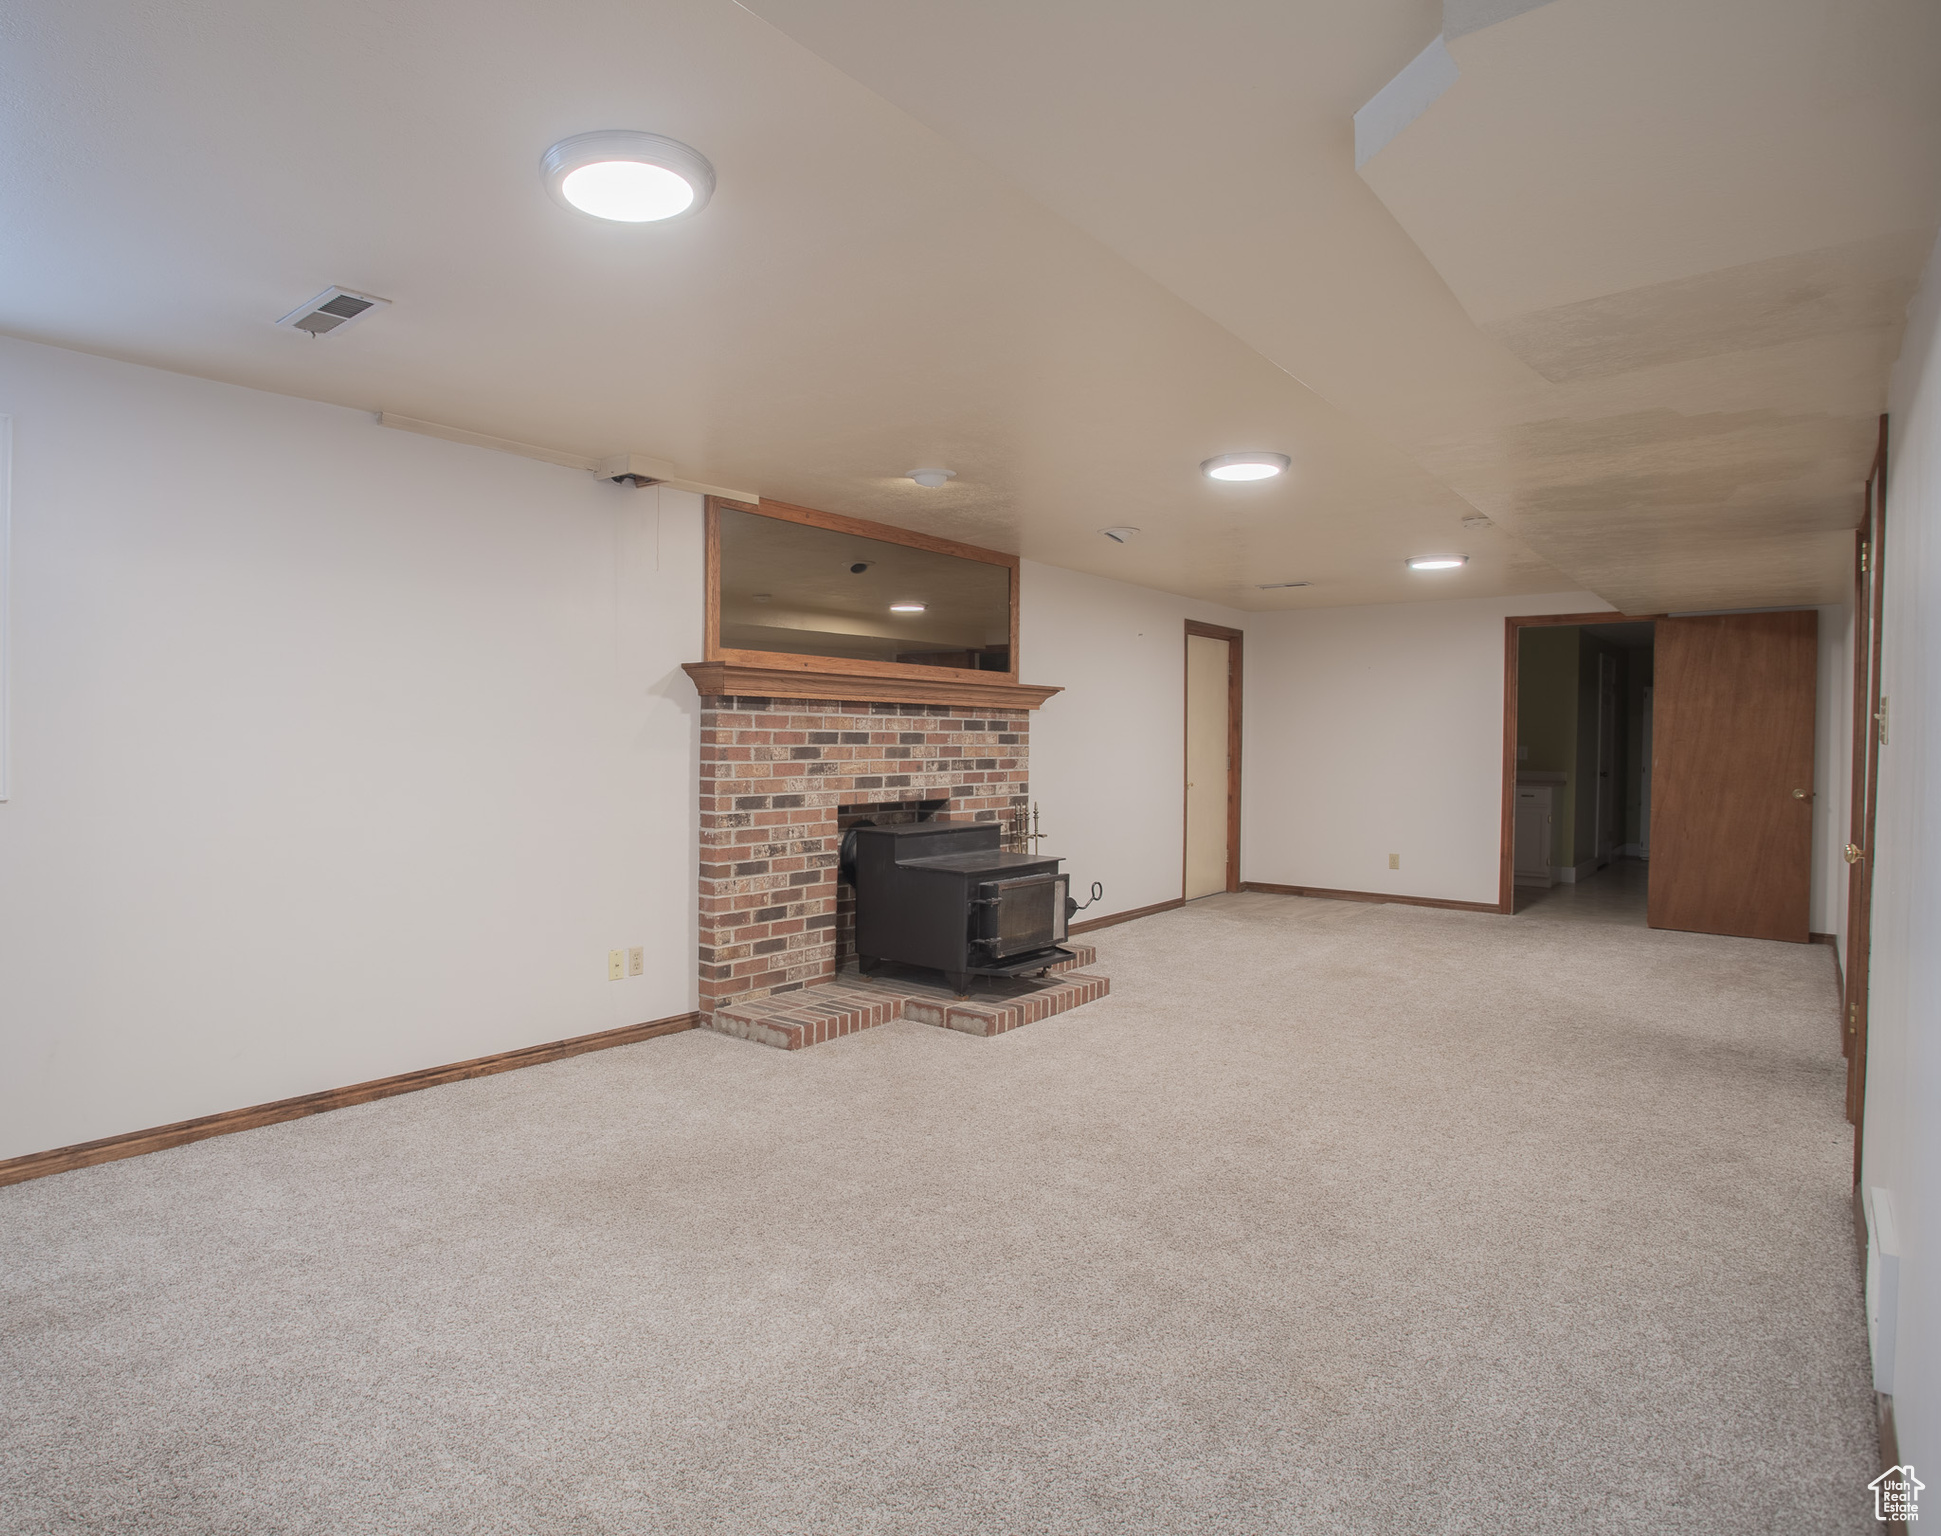 Unfurnished living room with a fireplace, a wood stove, and light carpet